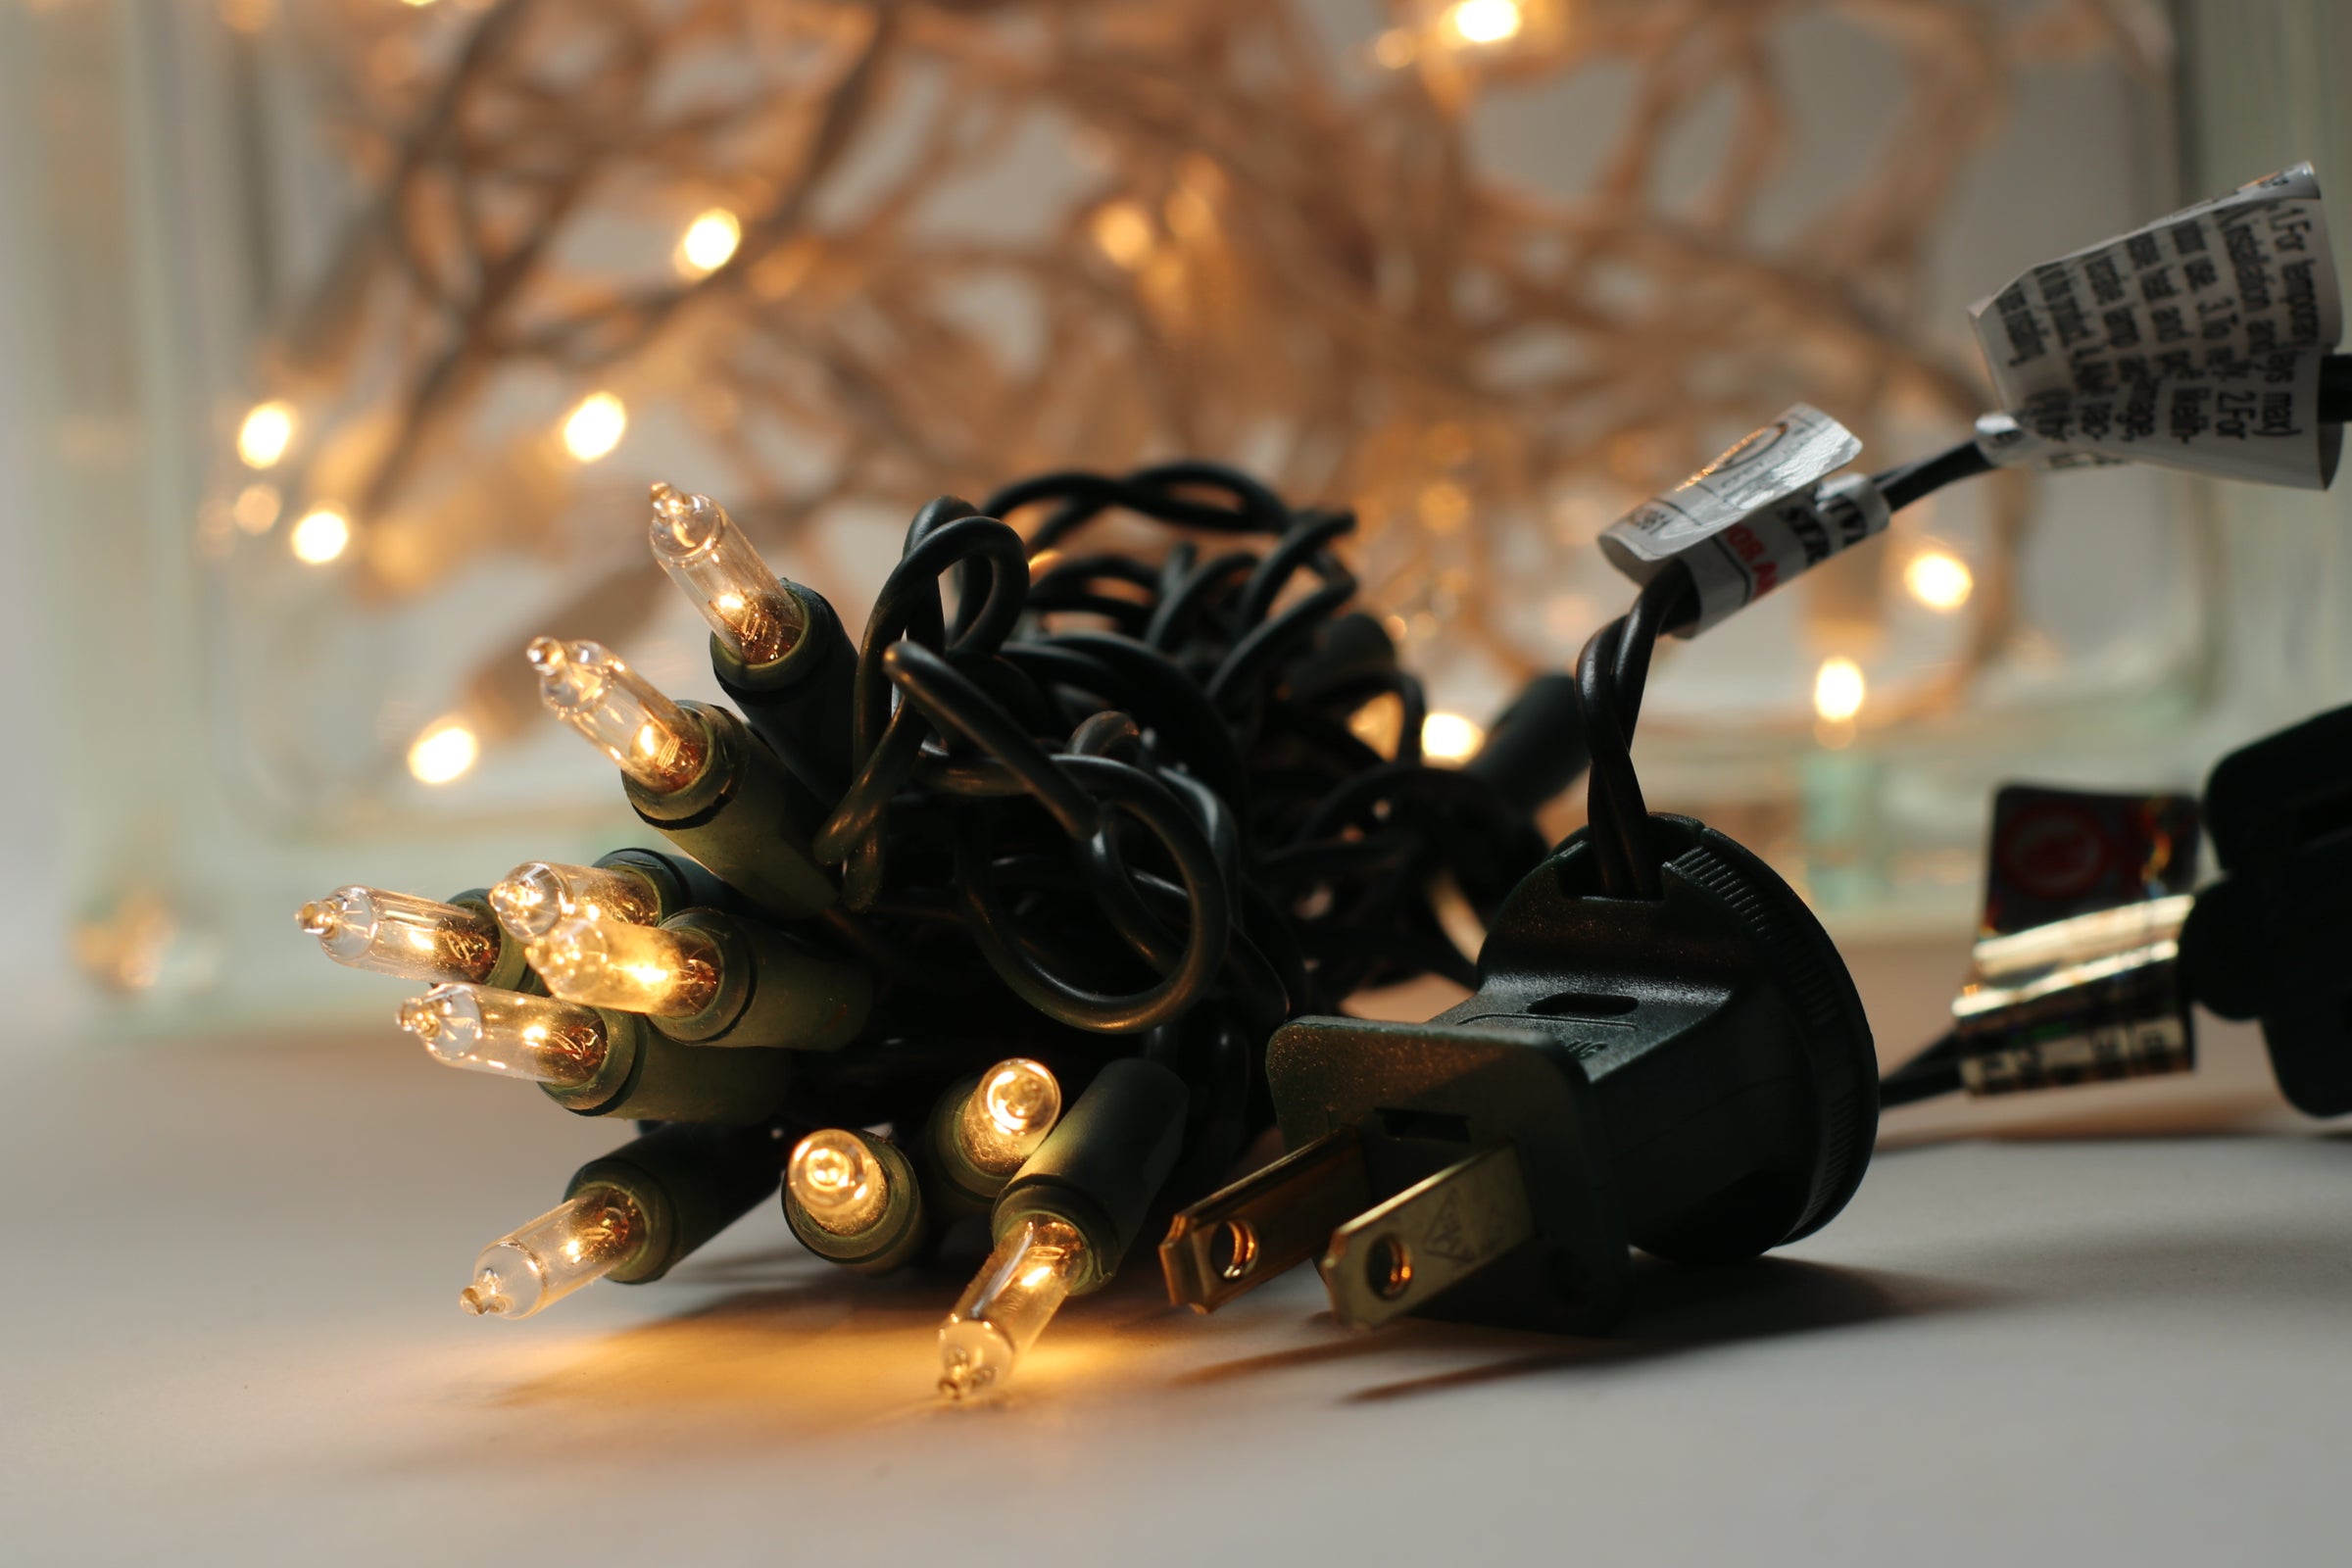 USB Fairy LED Light with Remote Control – Christmas Light Source